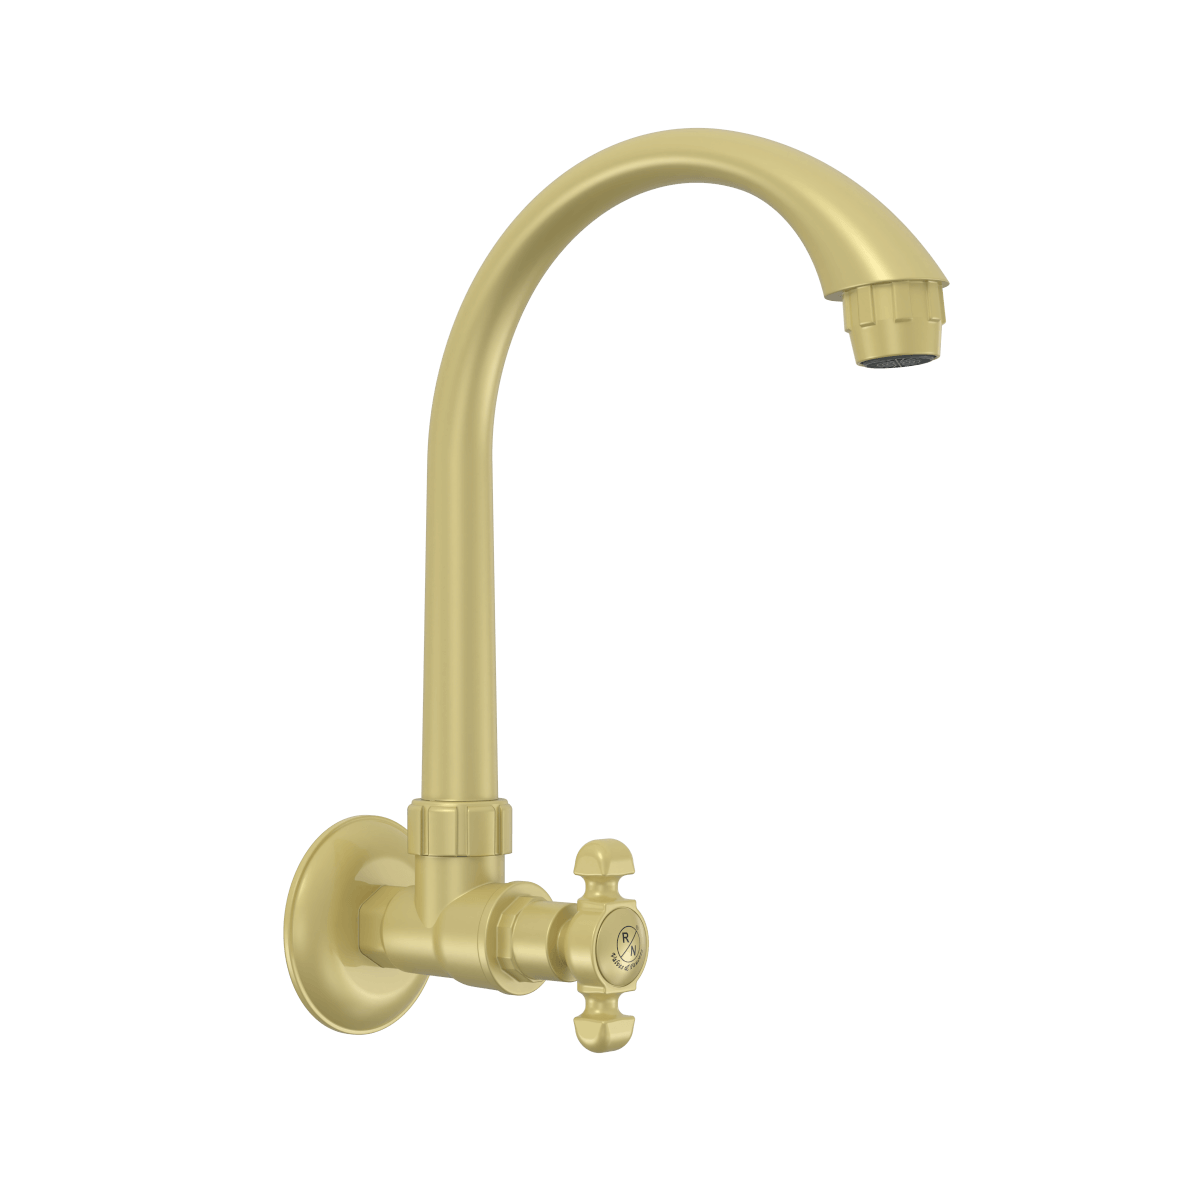 Sink Cock, Wall Mounted With Flange